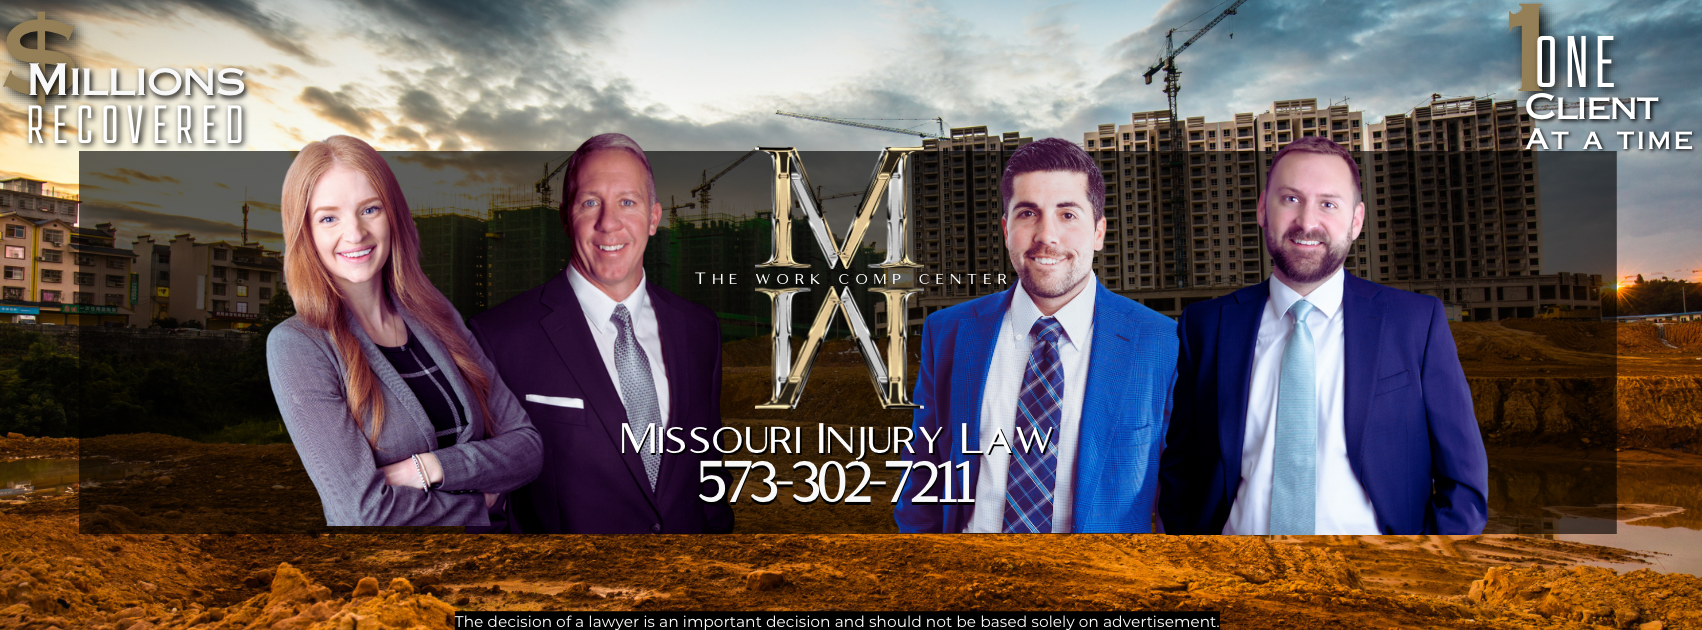 The Work Comp Center-Missouri Workers' Compensation Lawyers